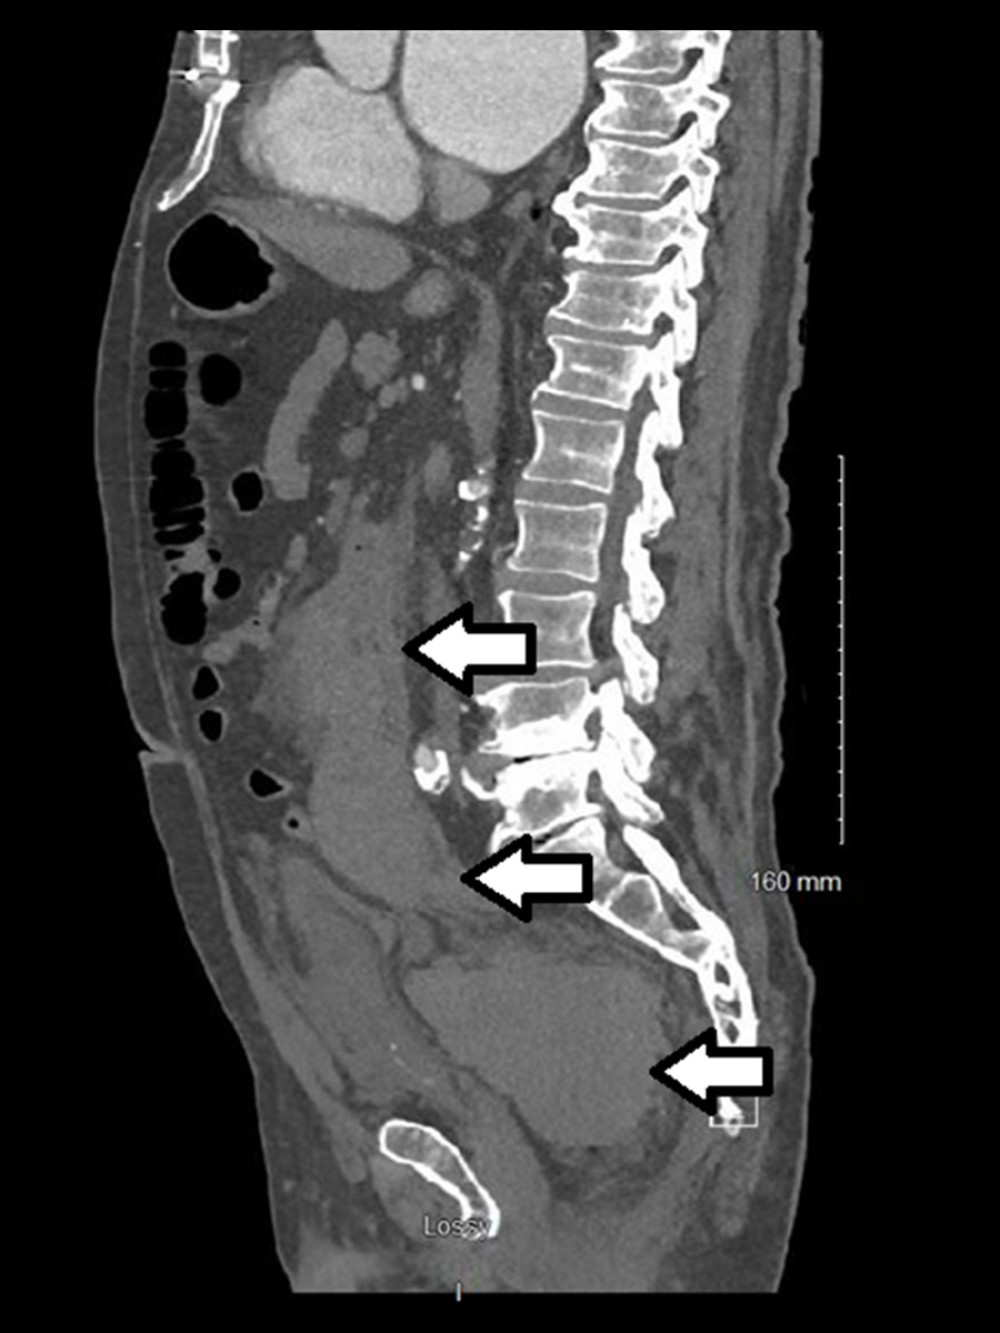 Initial presenting imaging of retroperitoneal hematoma. Sagittal imaging of the patient’s presenting CTA scan demonstrating a poorly-defined hematoma beginning in the right hemi-abdomen near the duodenum and expanding inferiorly towards the pelvis, indicated by the white arrows with black outline.